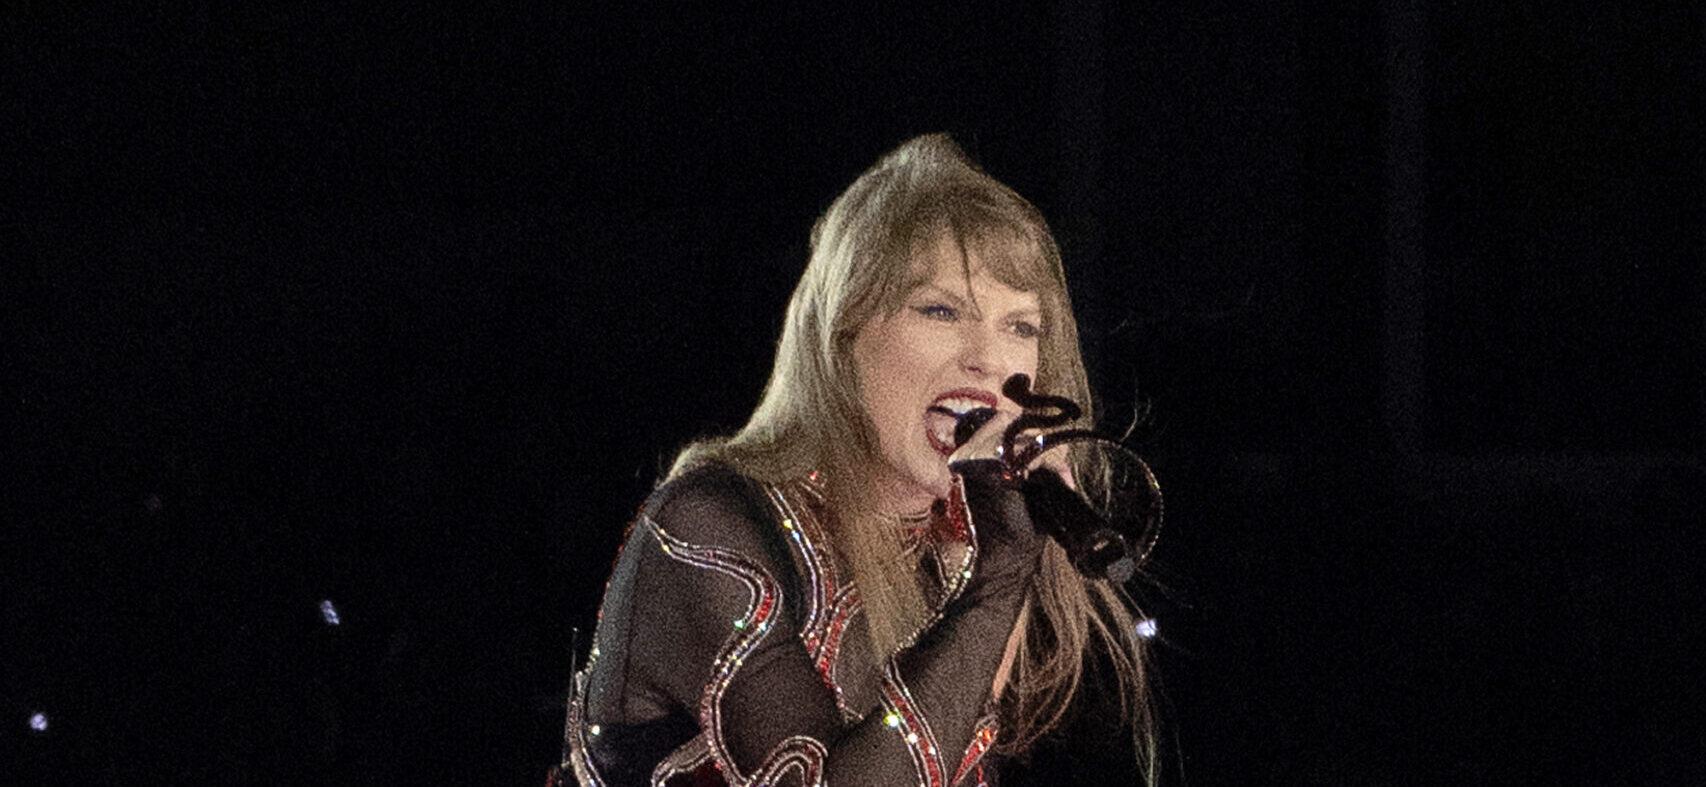 Taylor Swift delights her legion of fans as she takes to the stage in a staggering number of sparkling outfit changes during her Eras Tour stop in Tampa Florida